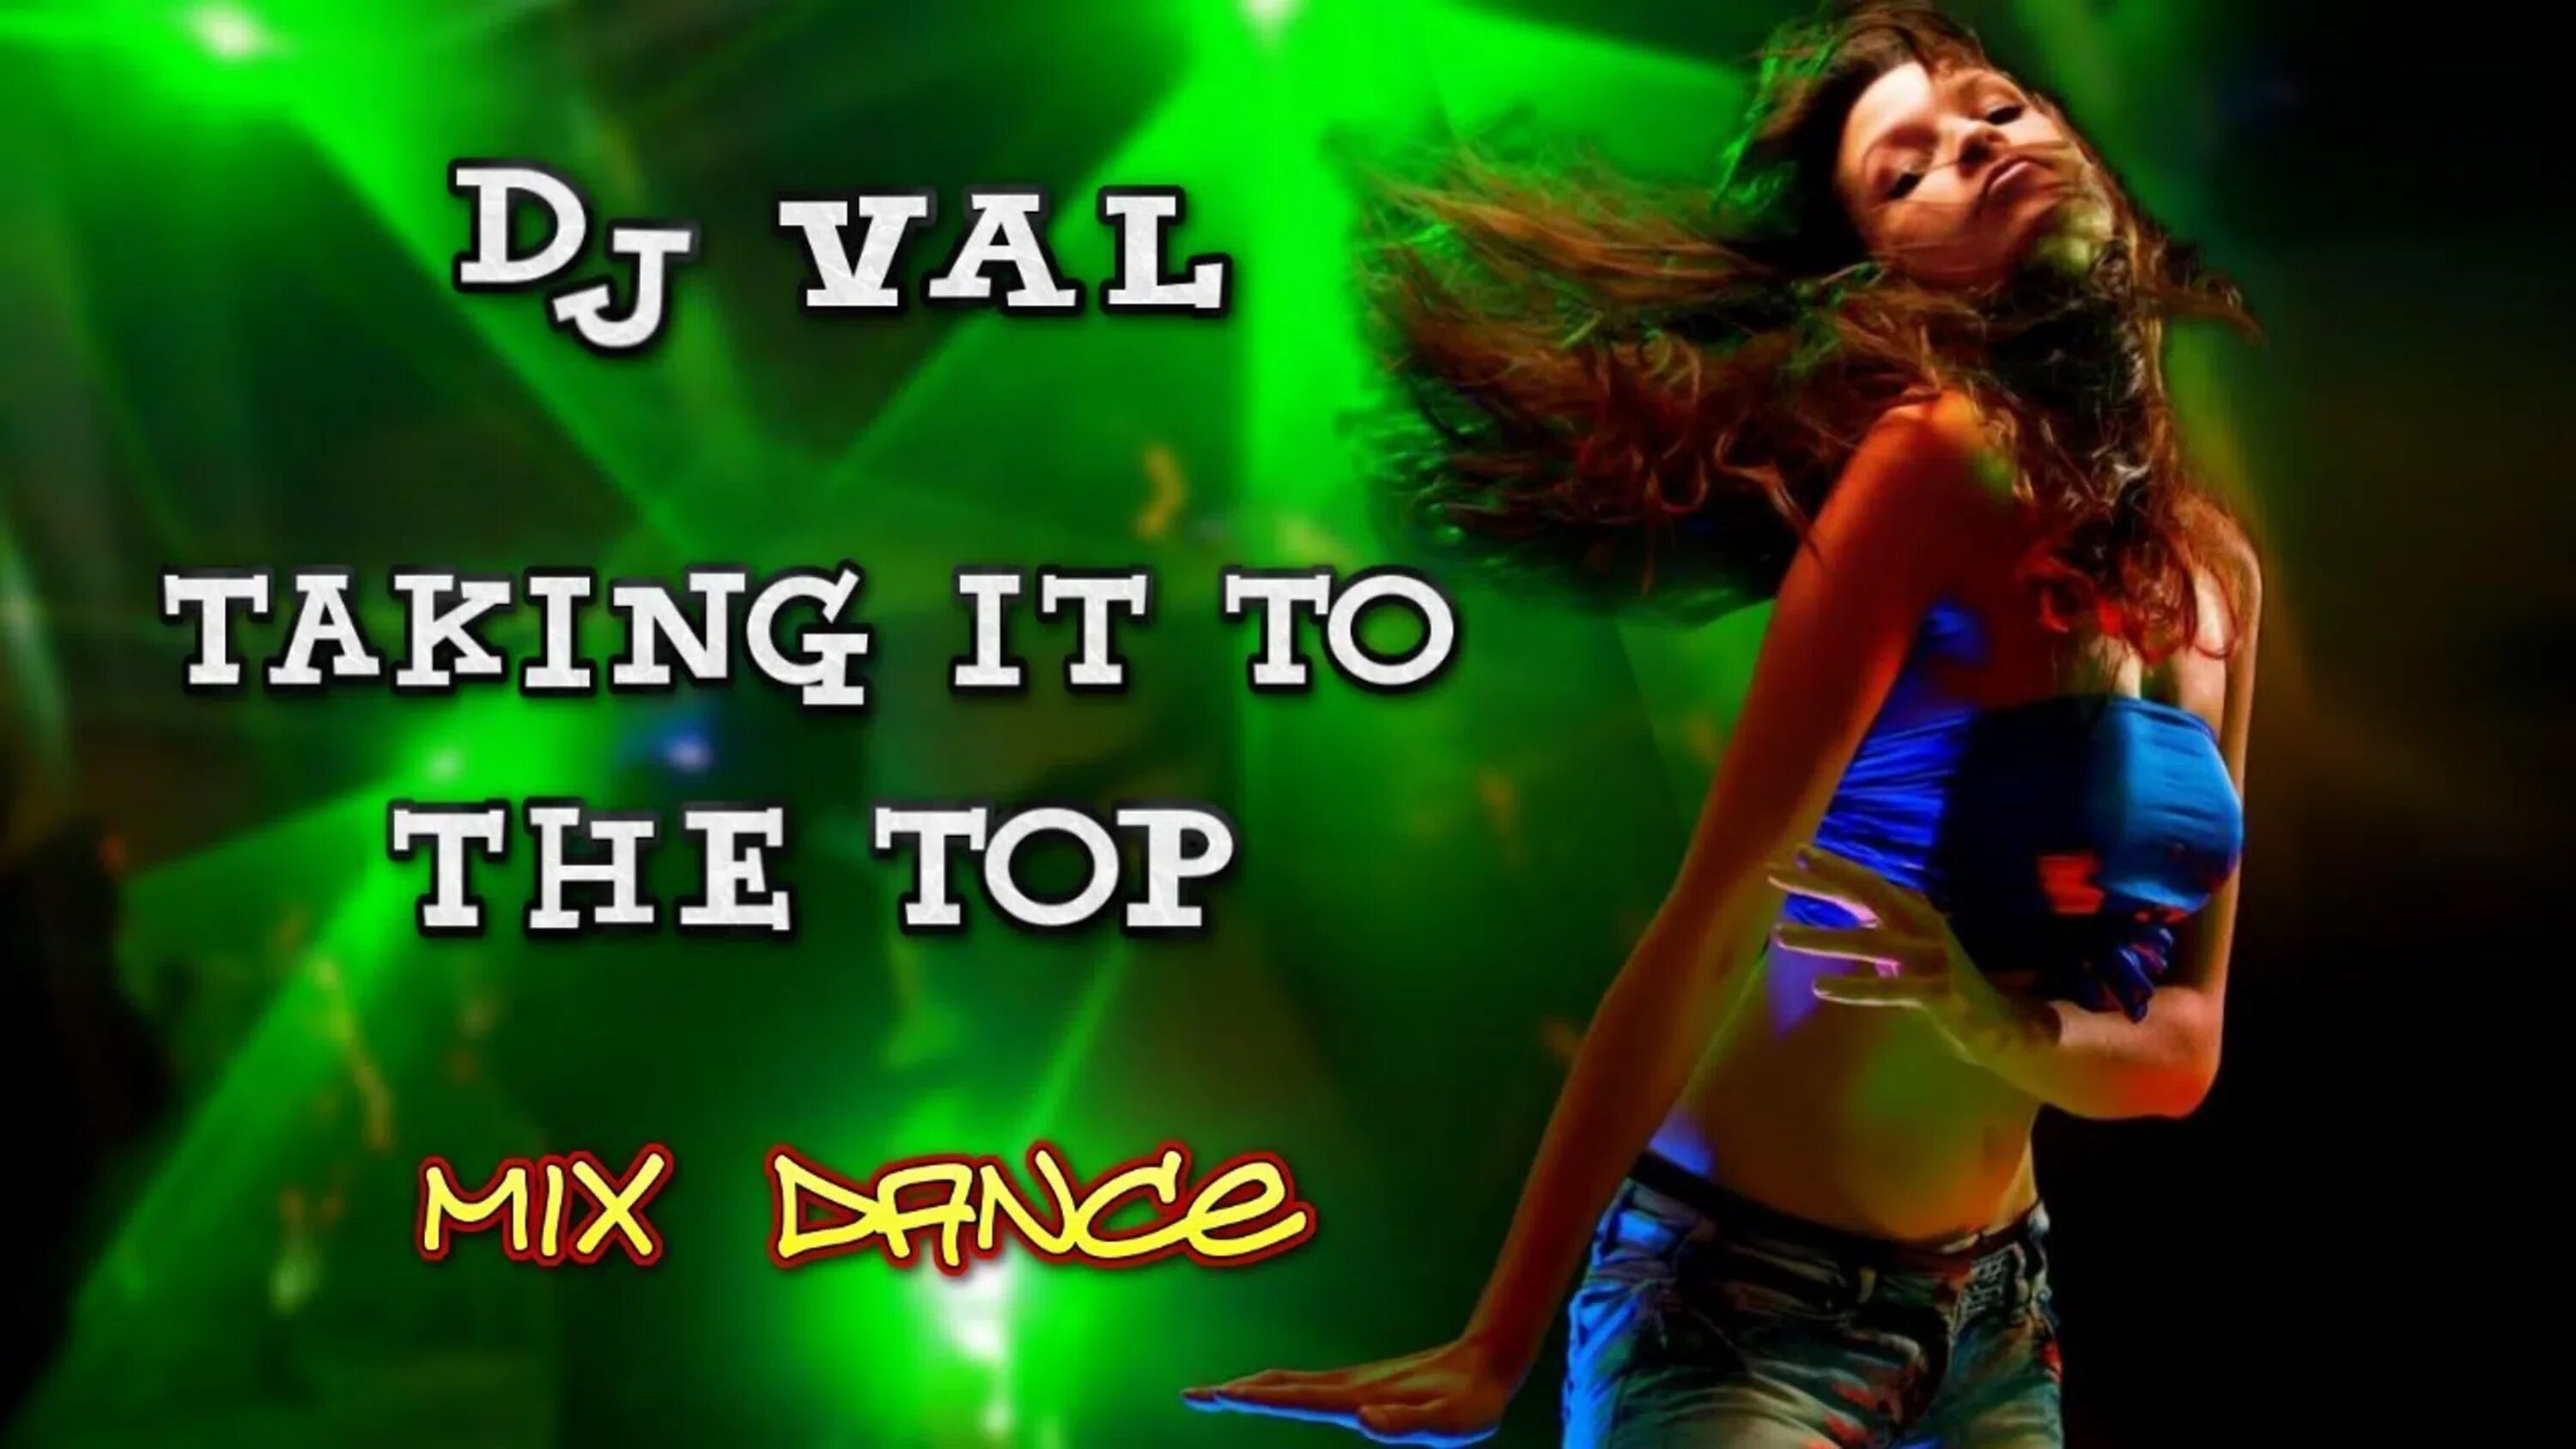 DJ Val - taking it to the Top. Евродэнс DJ Val. DJ Val i like. DJ Val Remix. Dj val не твой